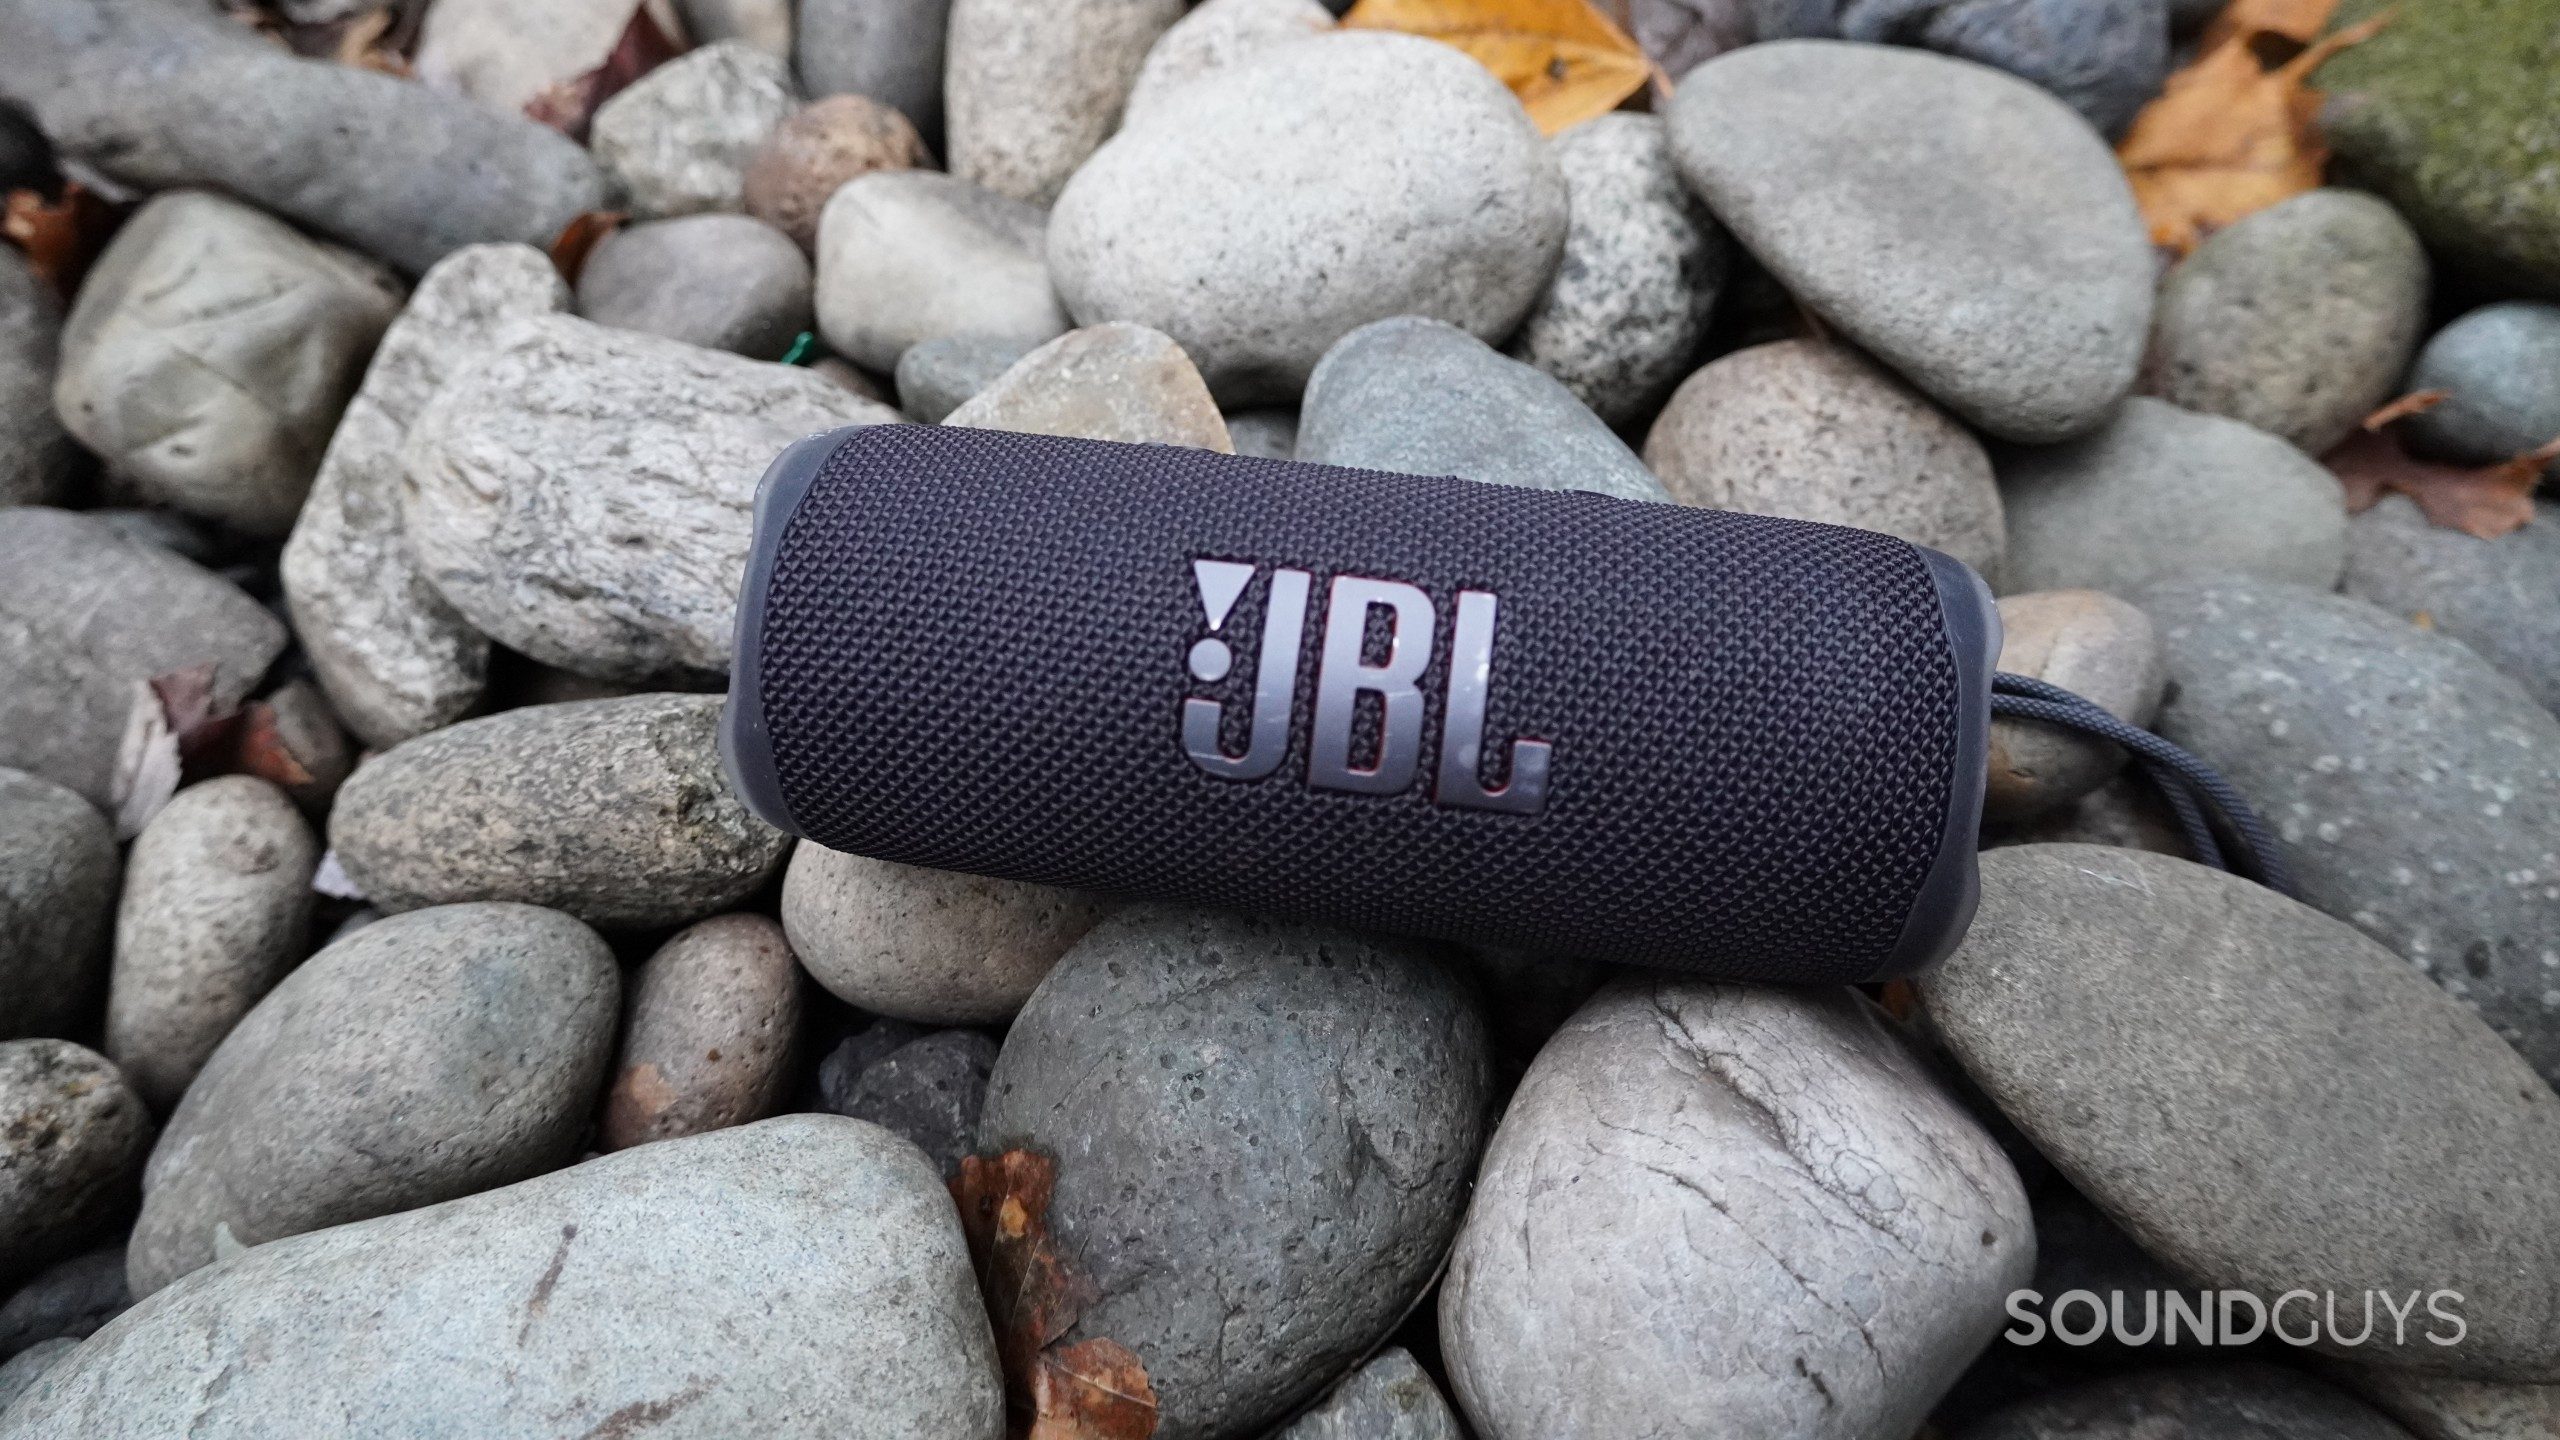 The JBL Flip 6 in black on a bed of flat stones.